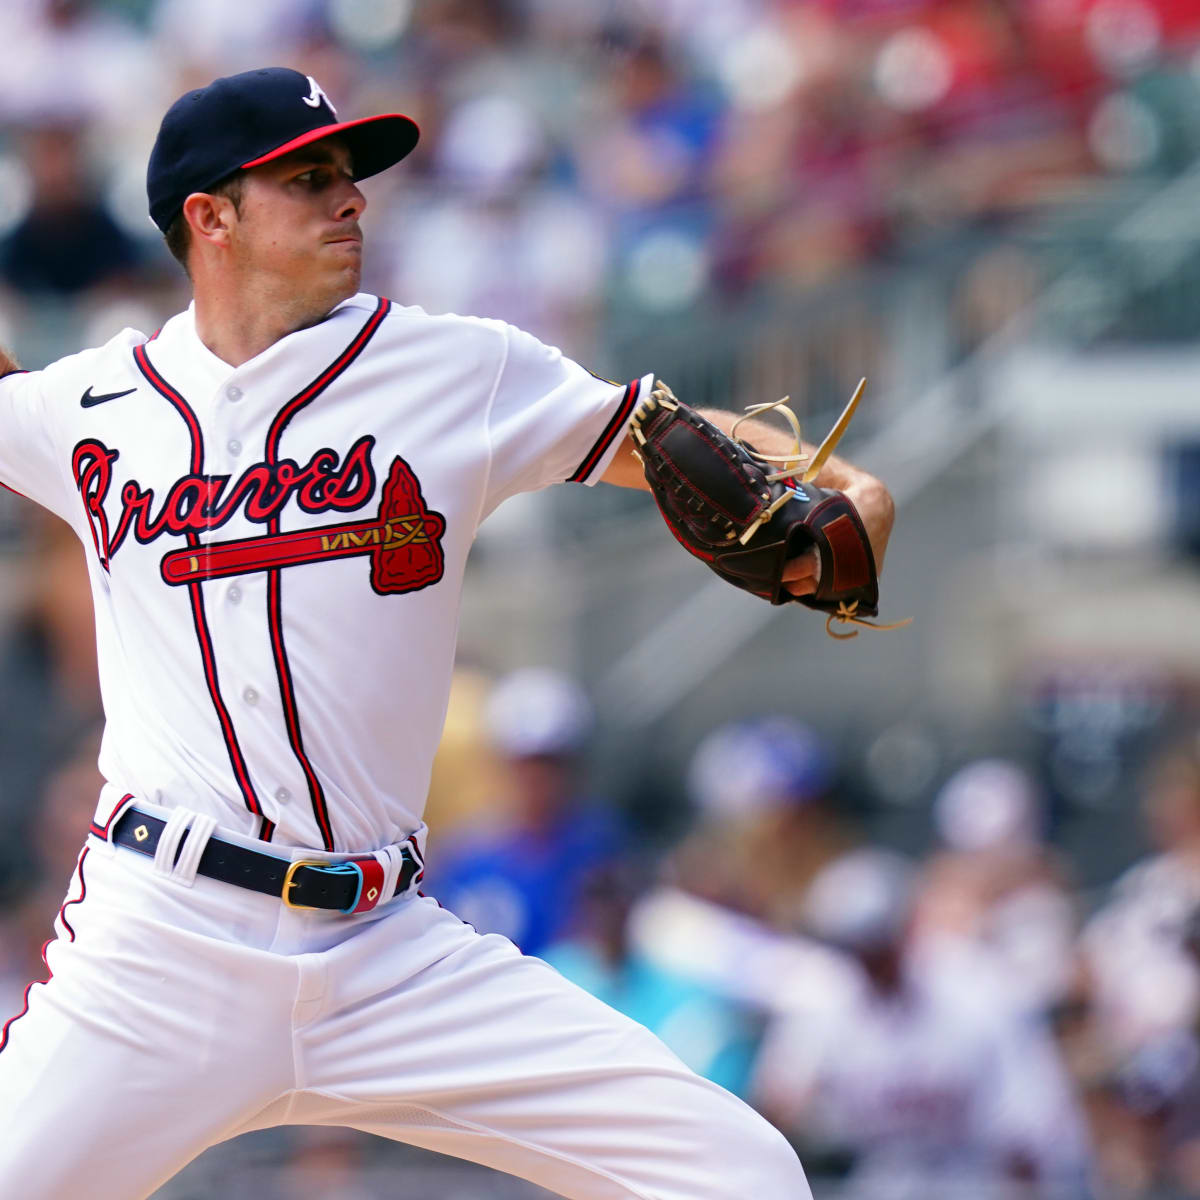 The Braves are back – here are 5 things to watch this season – WABE